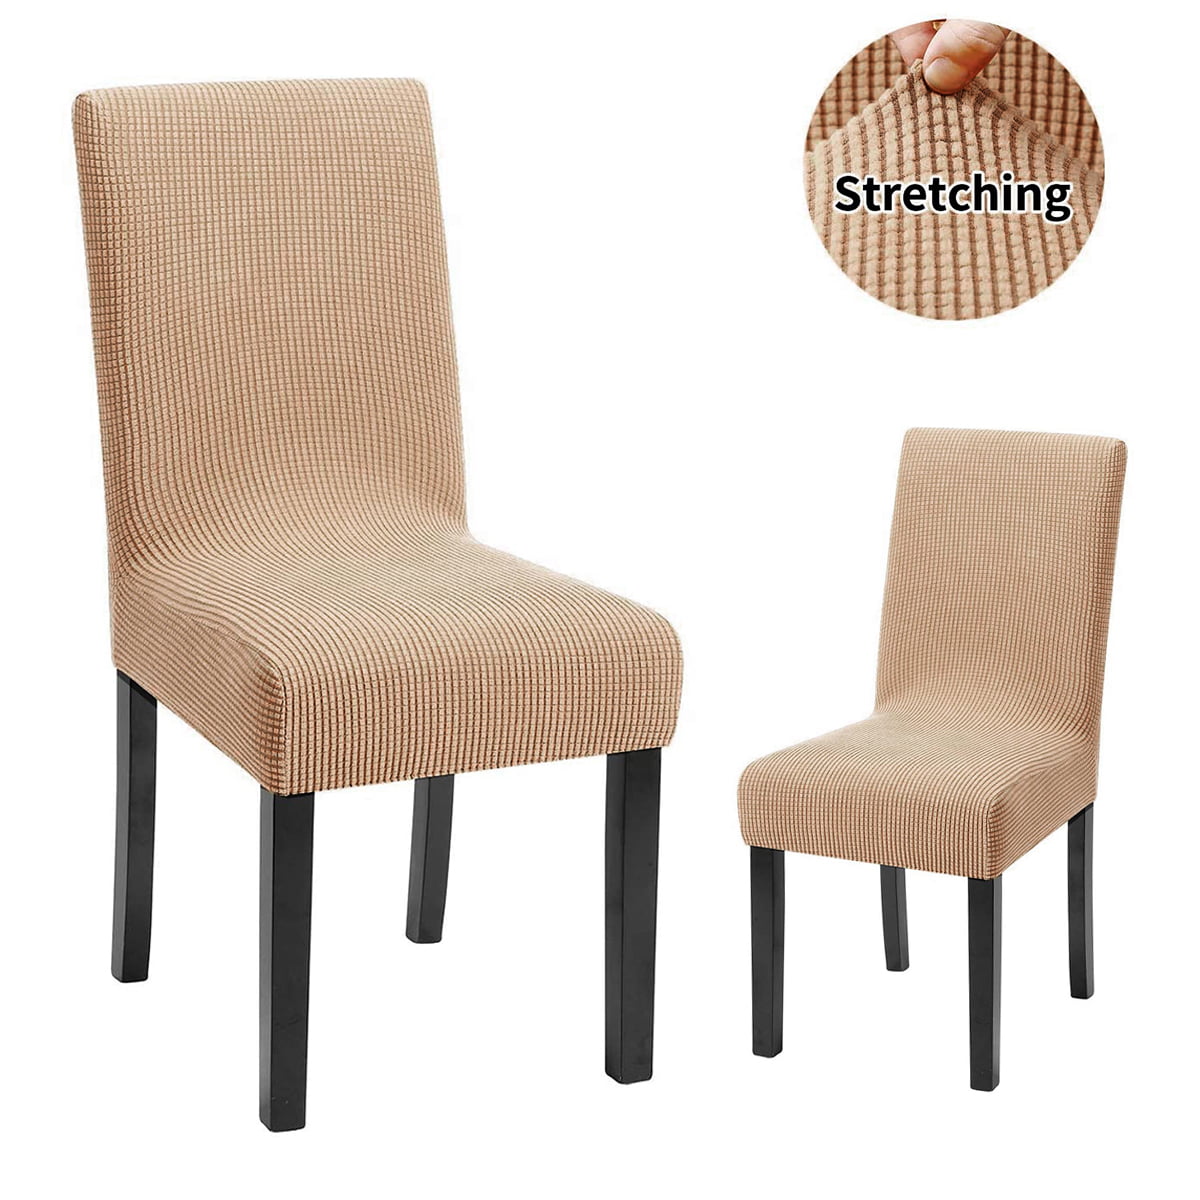 Details about   Stretch Dining Chair Covers Slipcovers Seat Protective Covers Dining Home De 